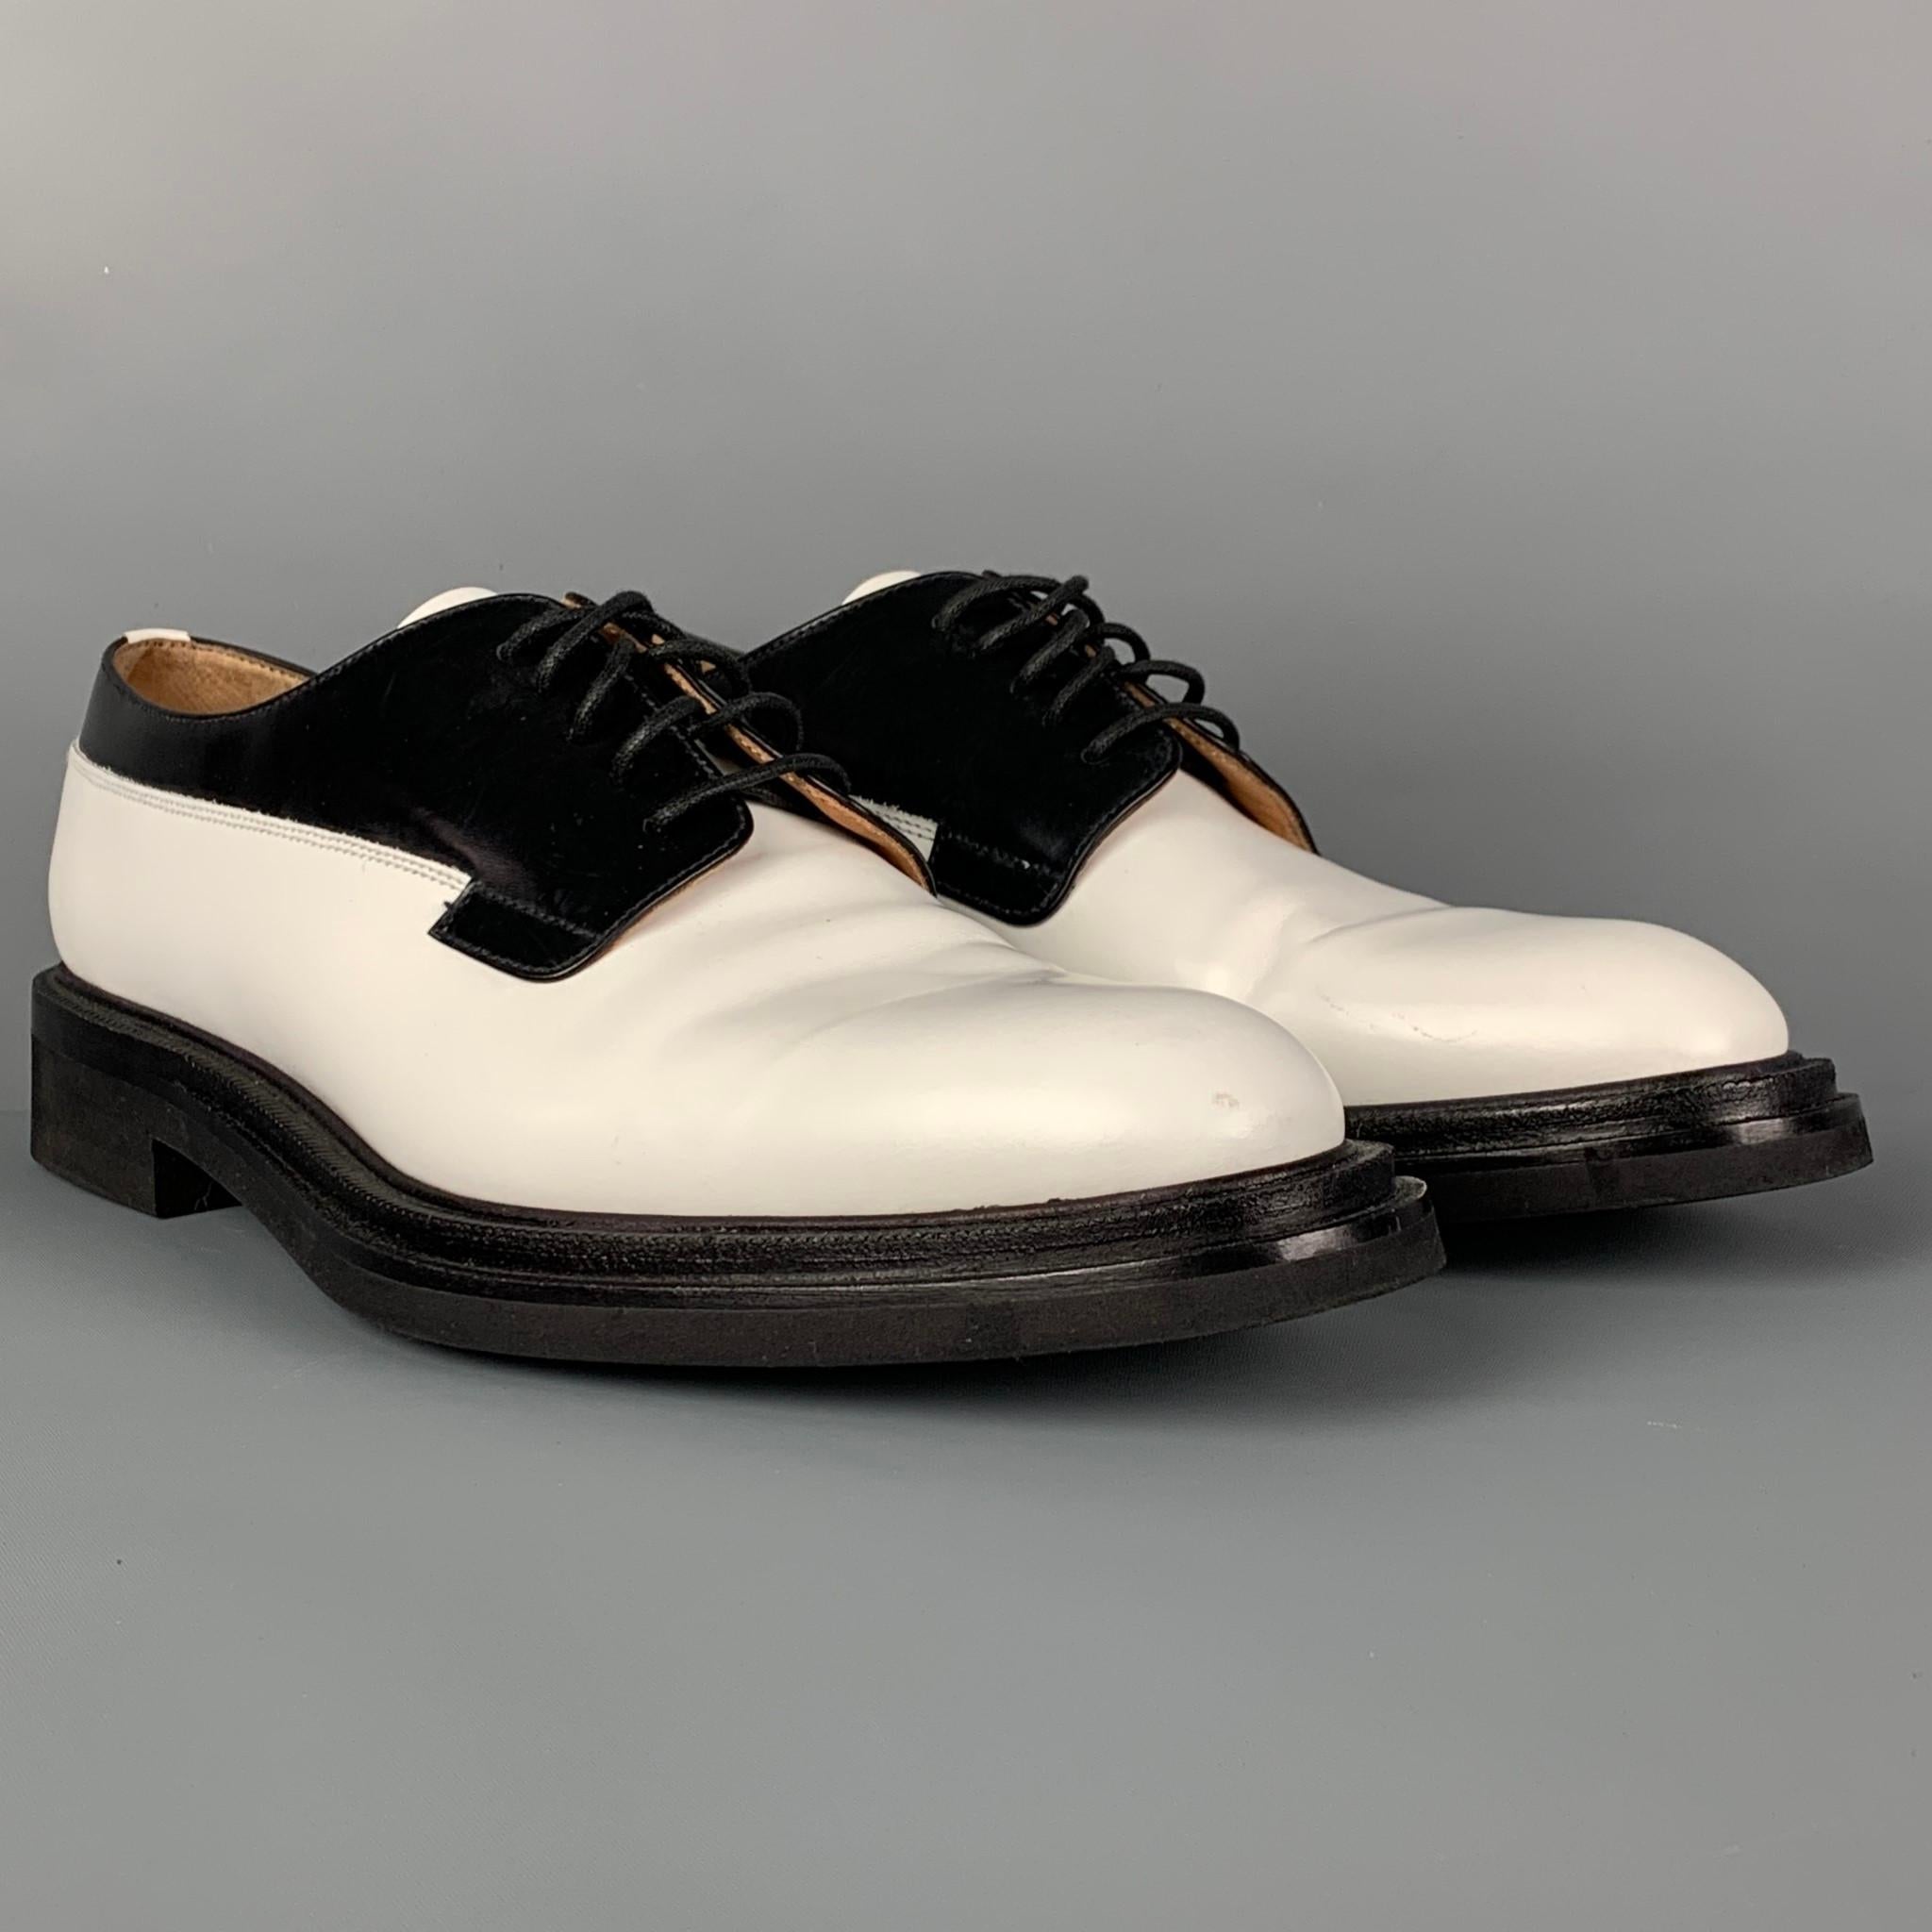 CHURCH'S 'Misty' shoes comes in a white & black two tone leather featuring a lace up closure. Includes box. Made in Italy. 

Very Good Pre-Owned Condition.
Marked: 8984103 40

Outsole: 11.75 in. x 4.5 in. 